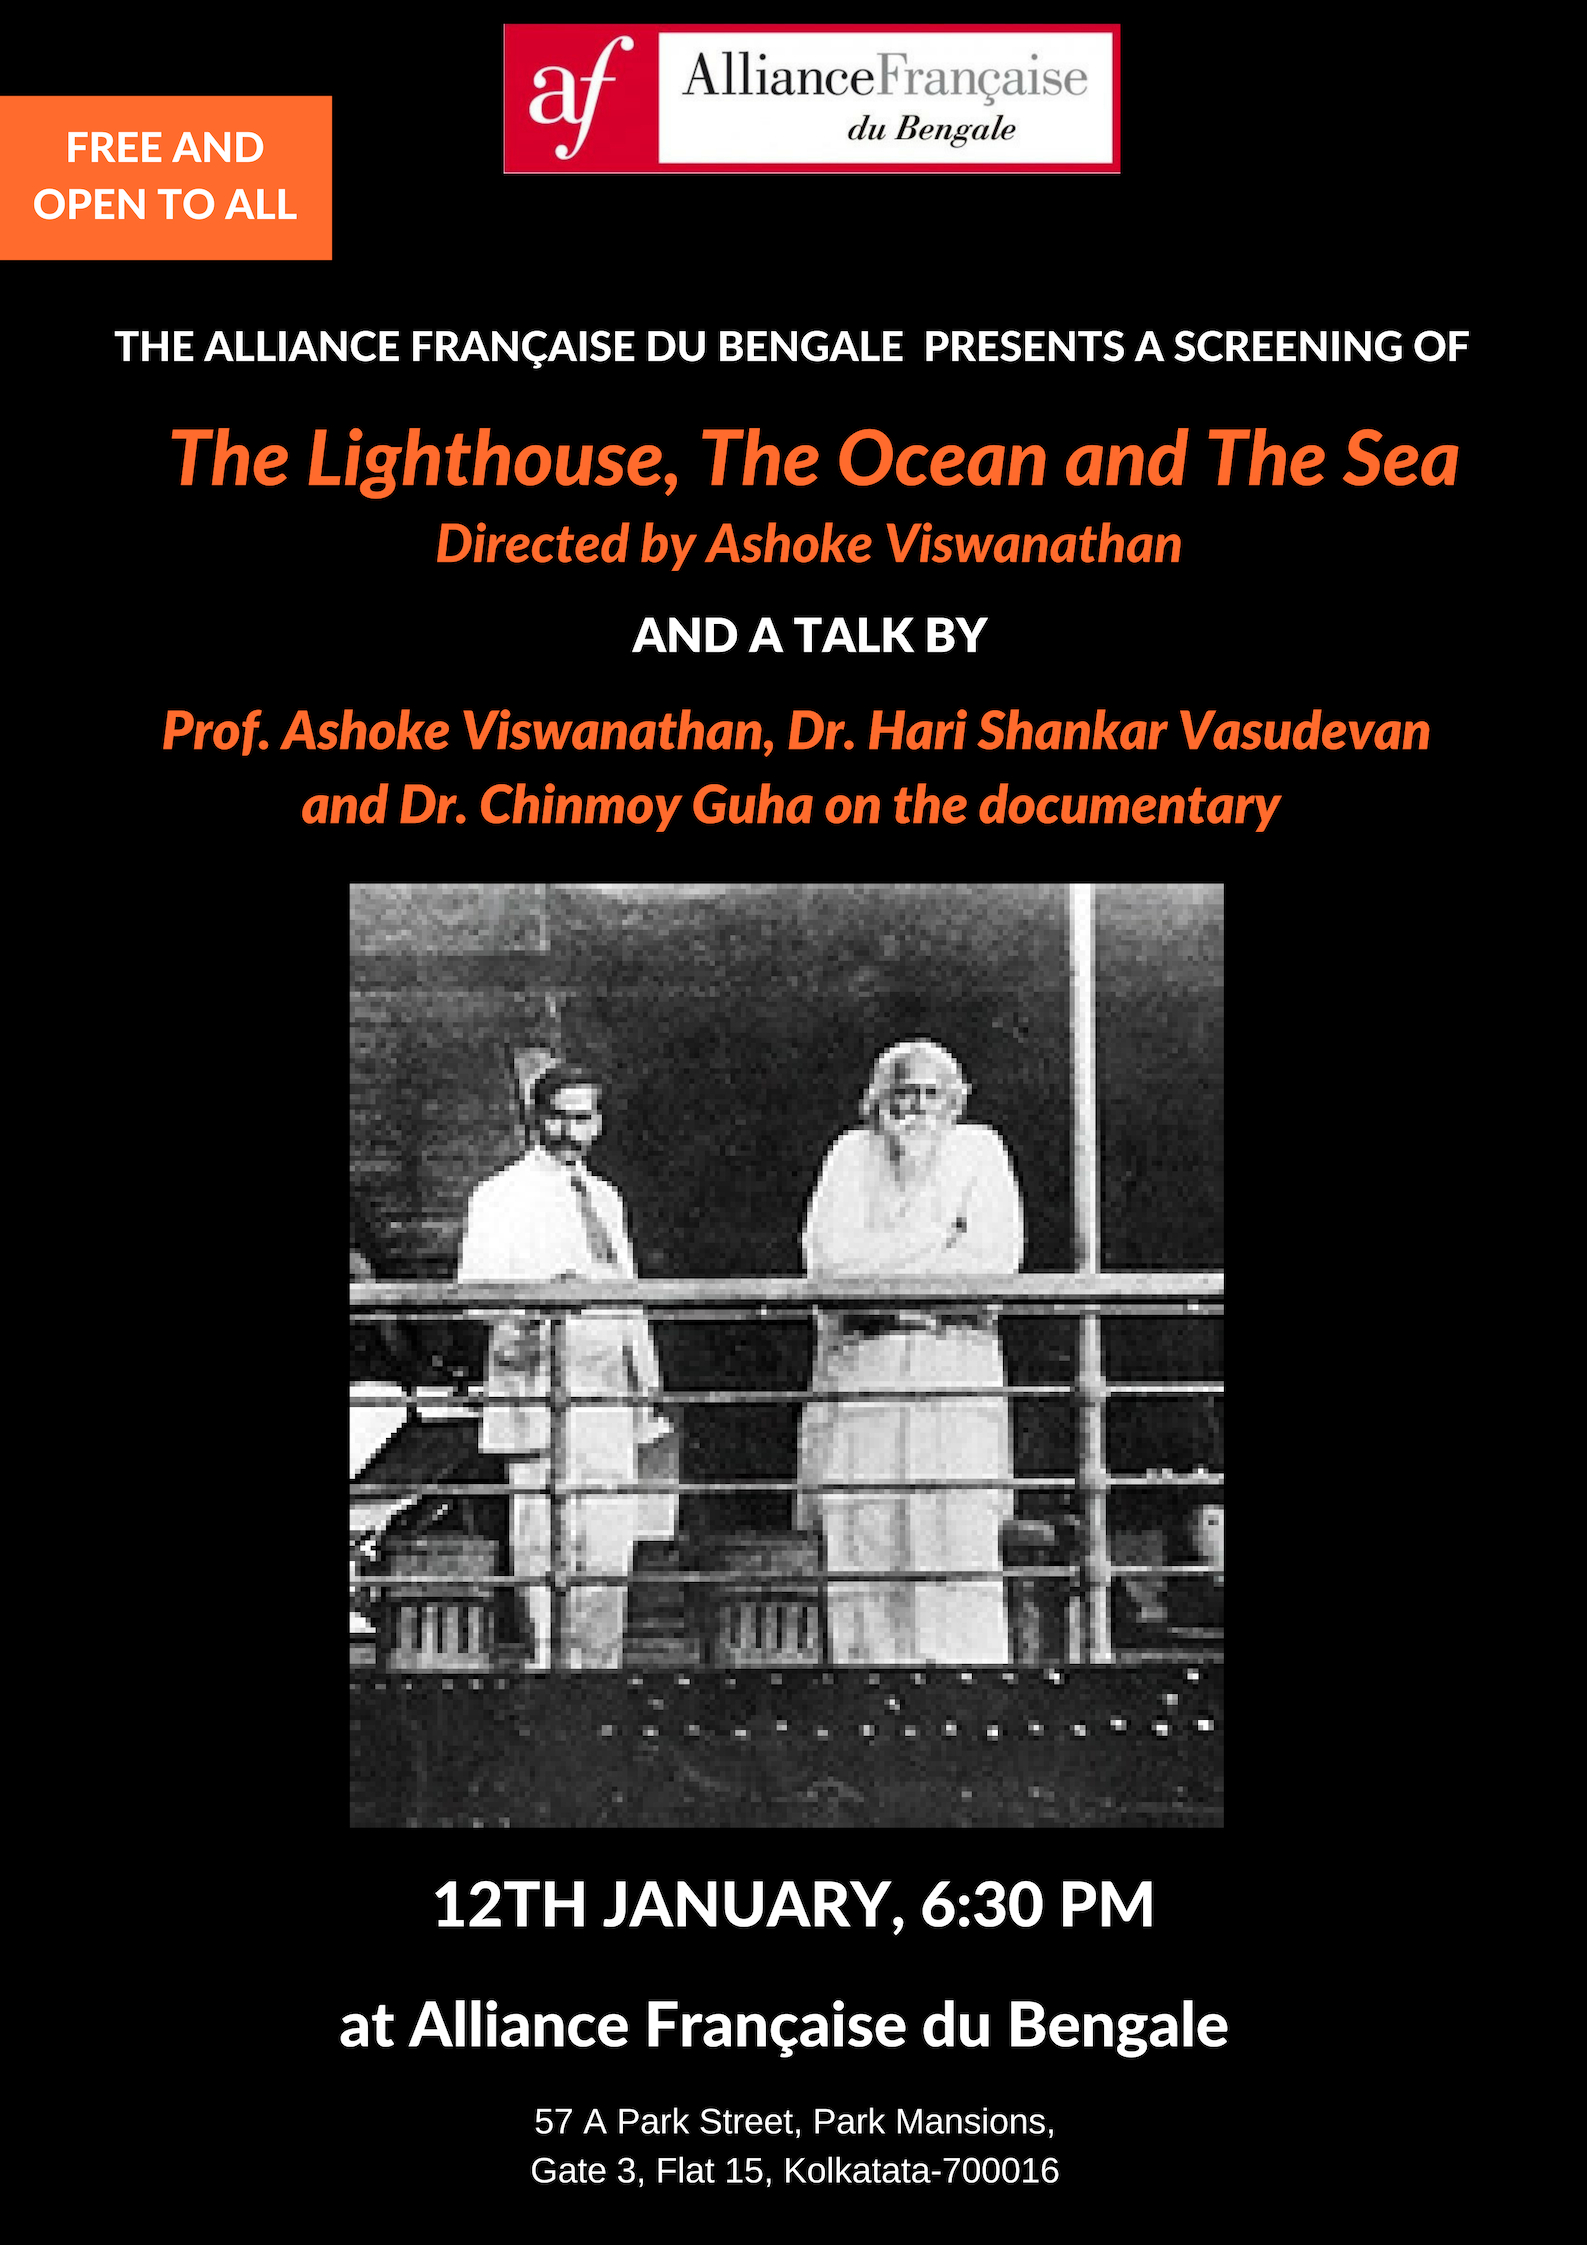 Screening of 'The Lighthouse, The Ocean and The Sea': A Documentary by Ashoke Viswanathan